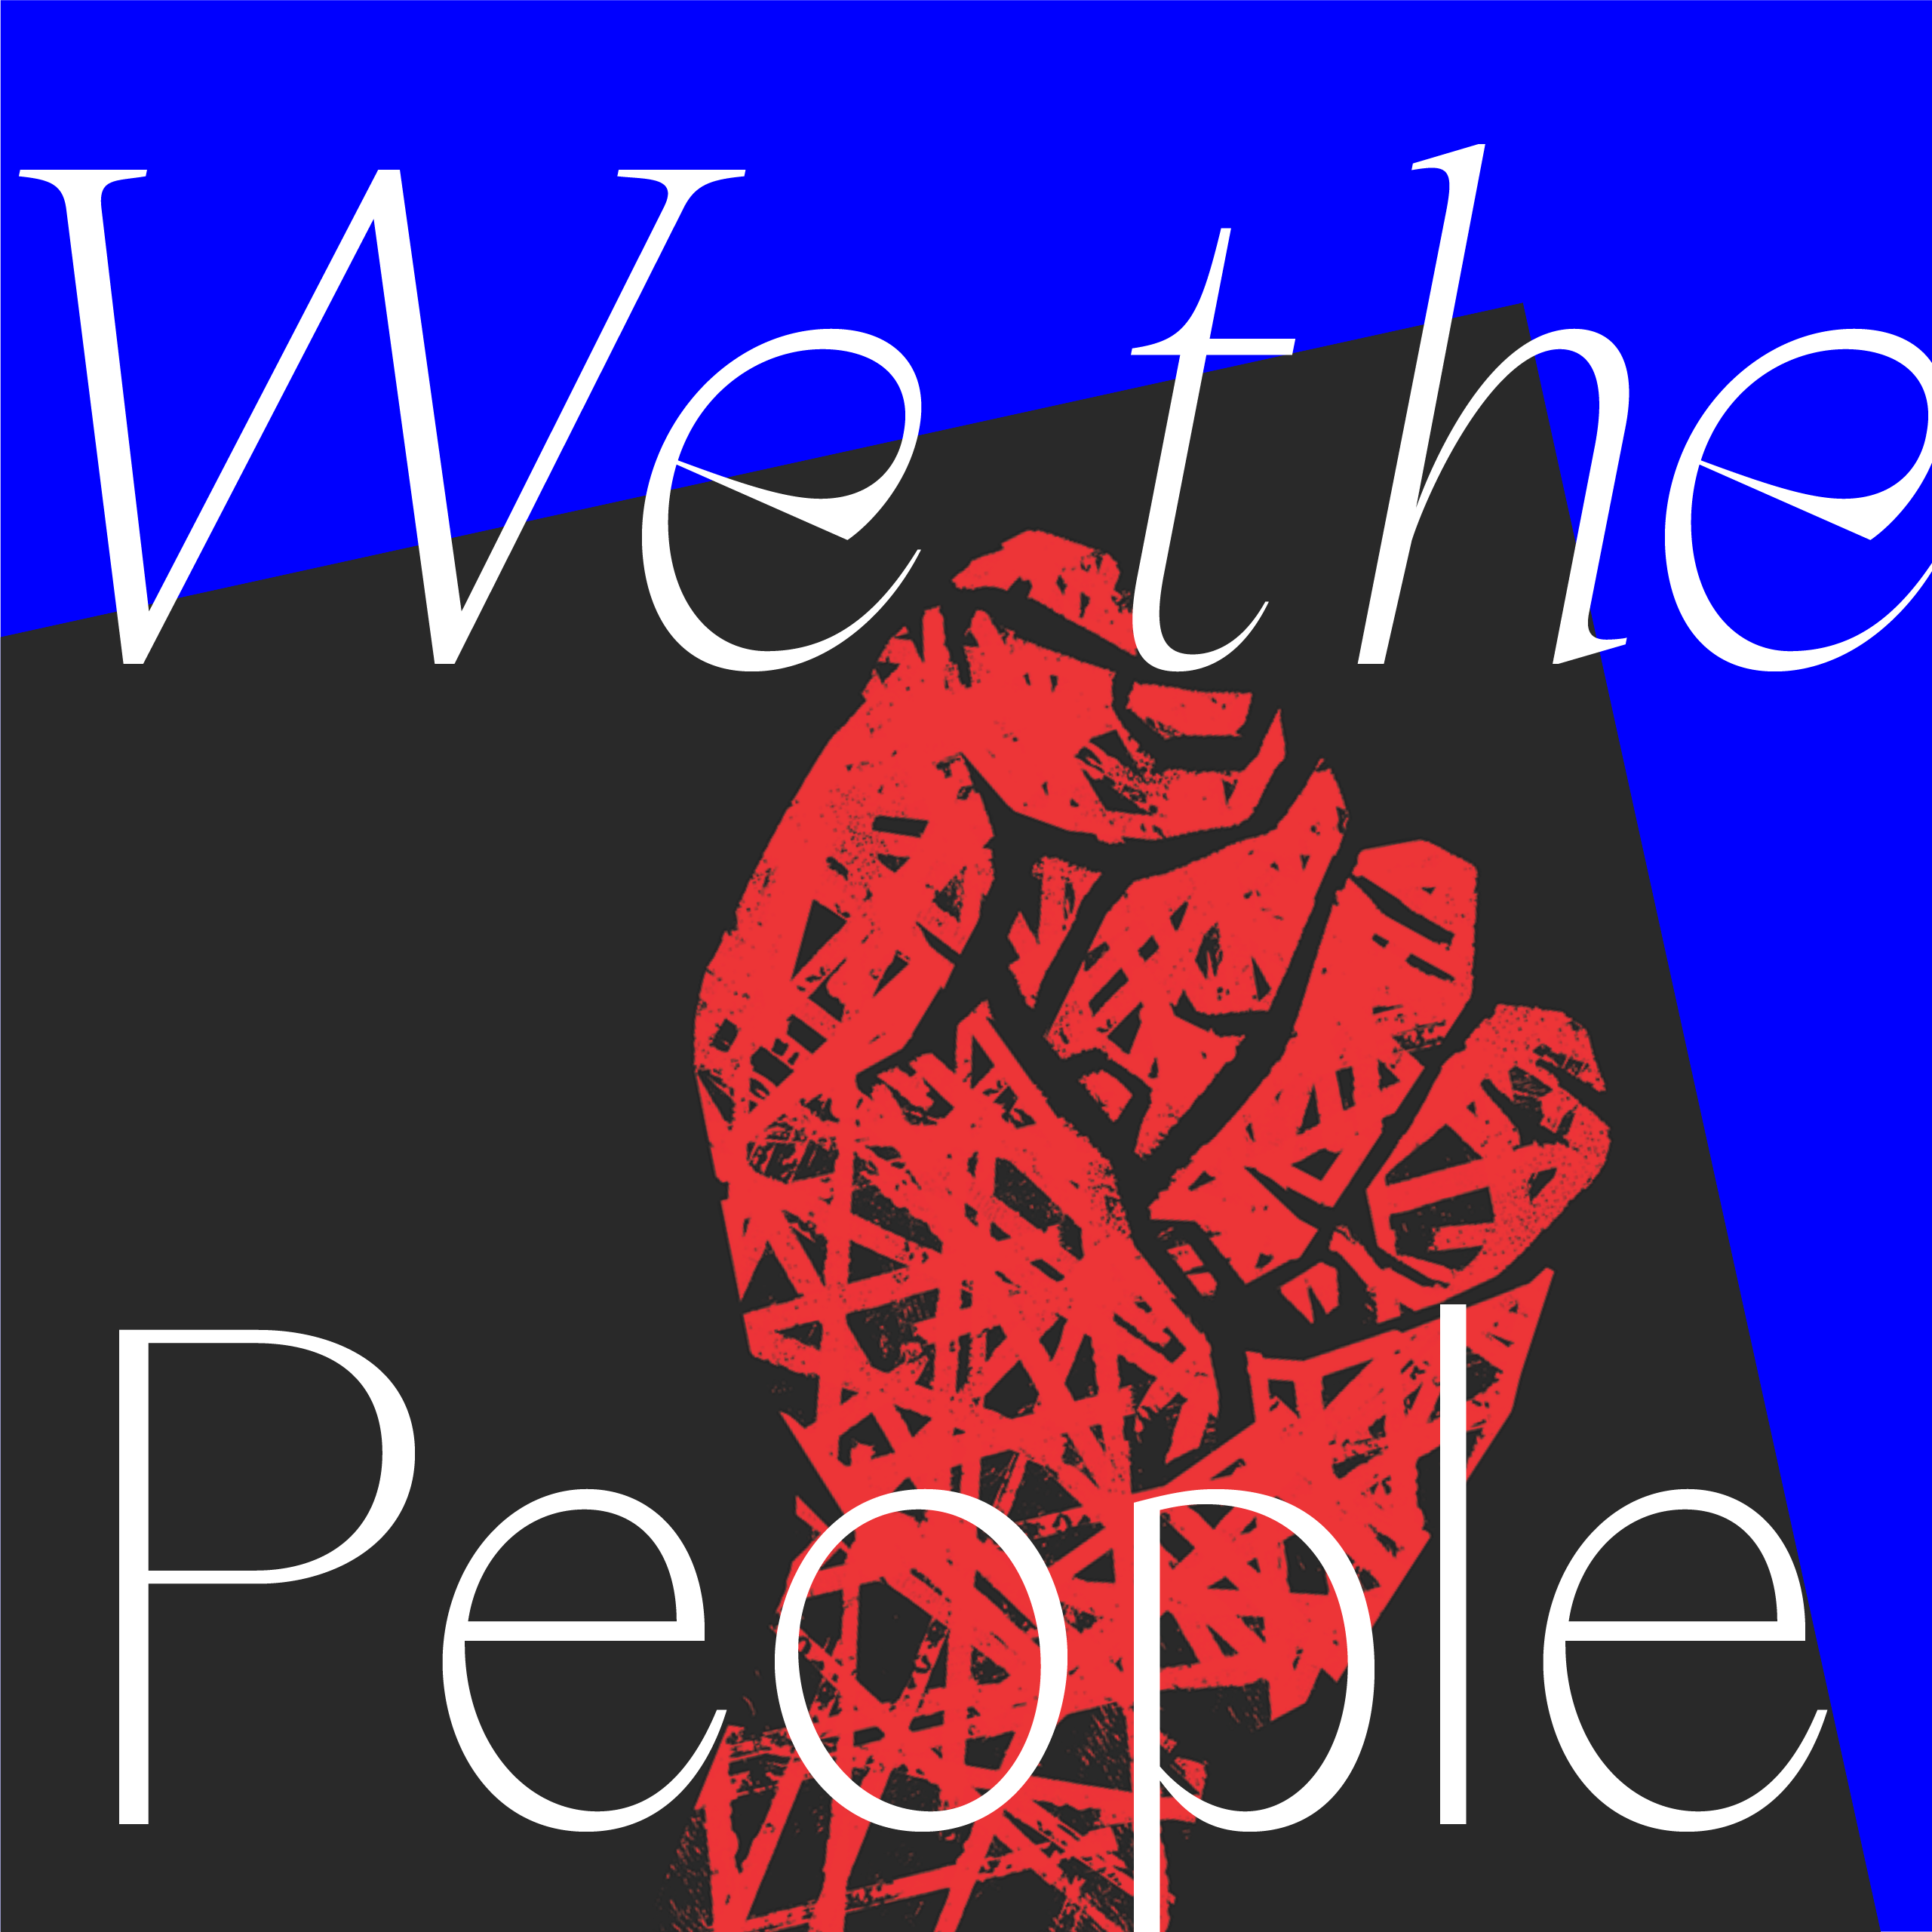 a drawn red fist against a black and blue background with the words we the people over it